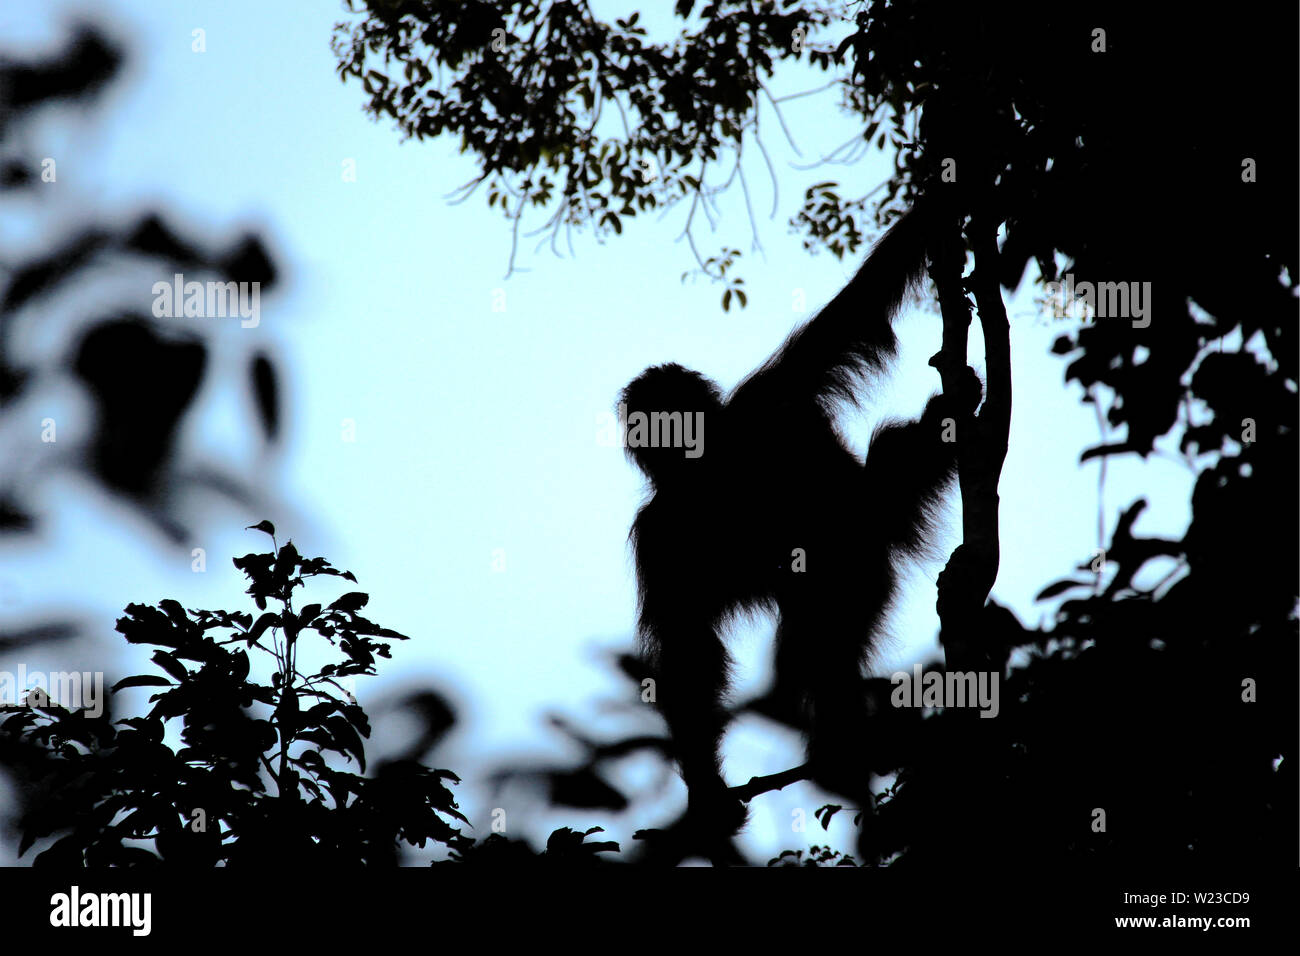 Silhouette of an Orang-Utan between trees and plants in front of the sky in the evening in Borneo, Indonesia, south-east Asia. Stock Photo